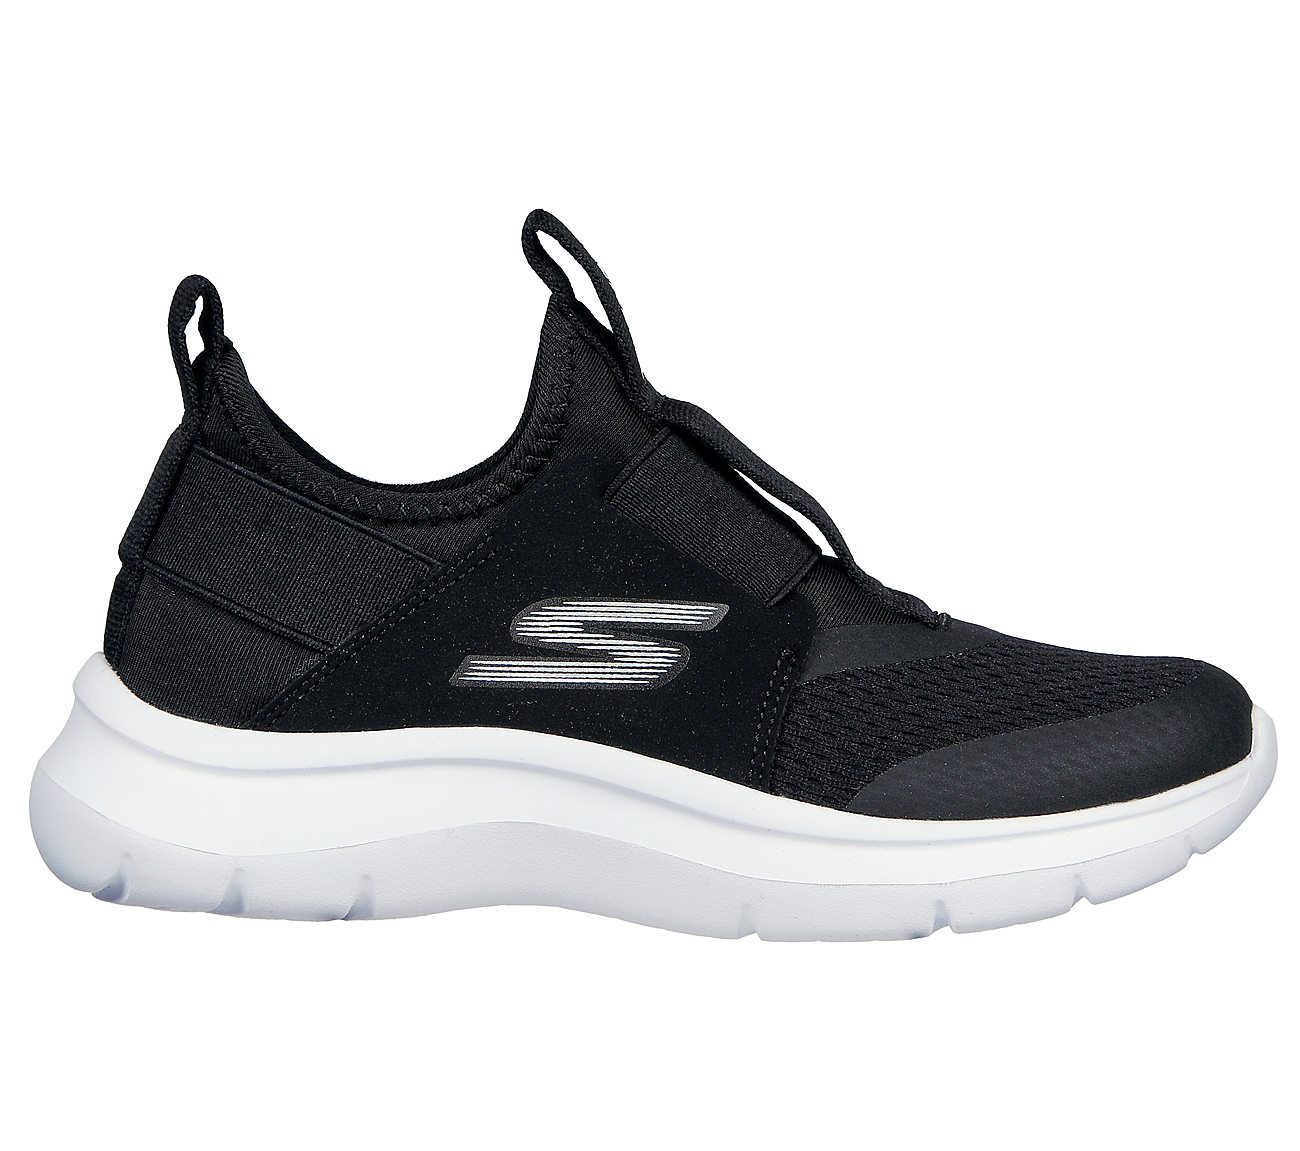 SKECH FAST, BLACK/WHITE Footwear Right View